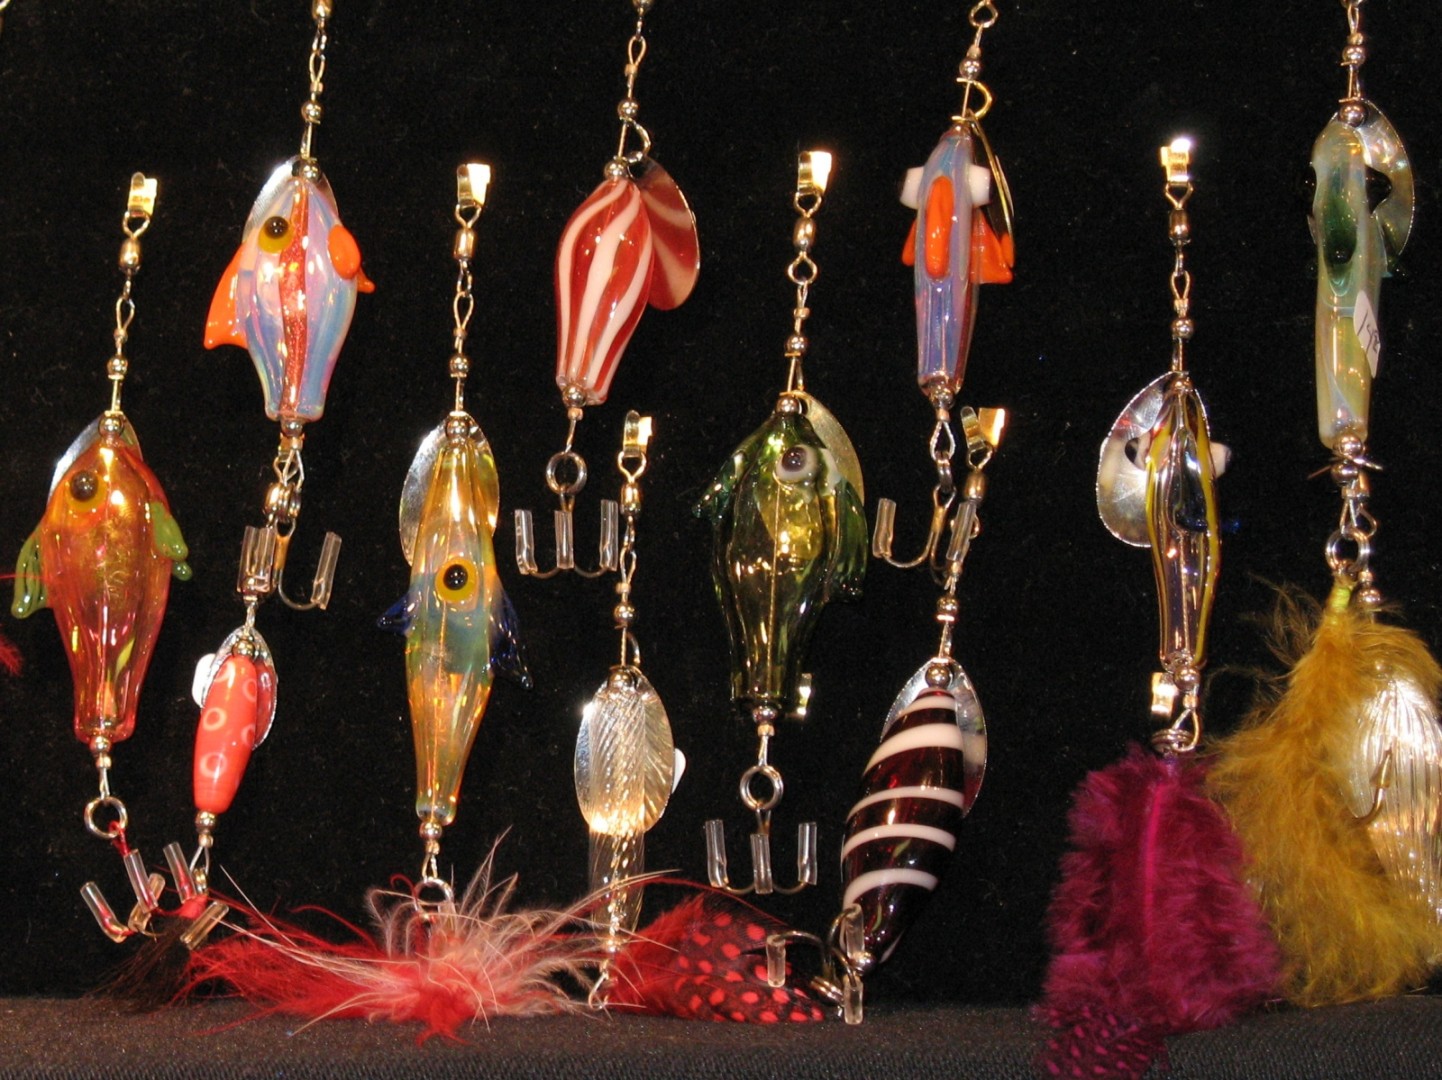 Glass Blowing Equipment & Supplies in Eastern Pennsylvania (PA) on